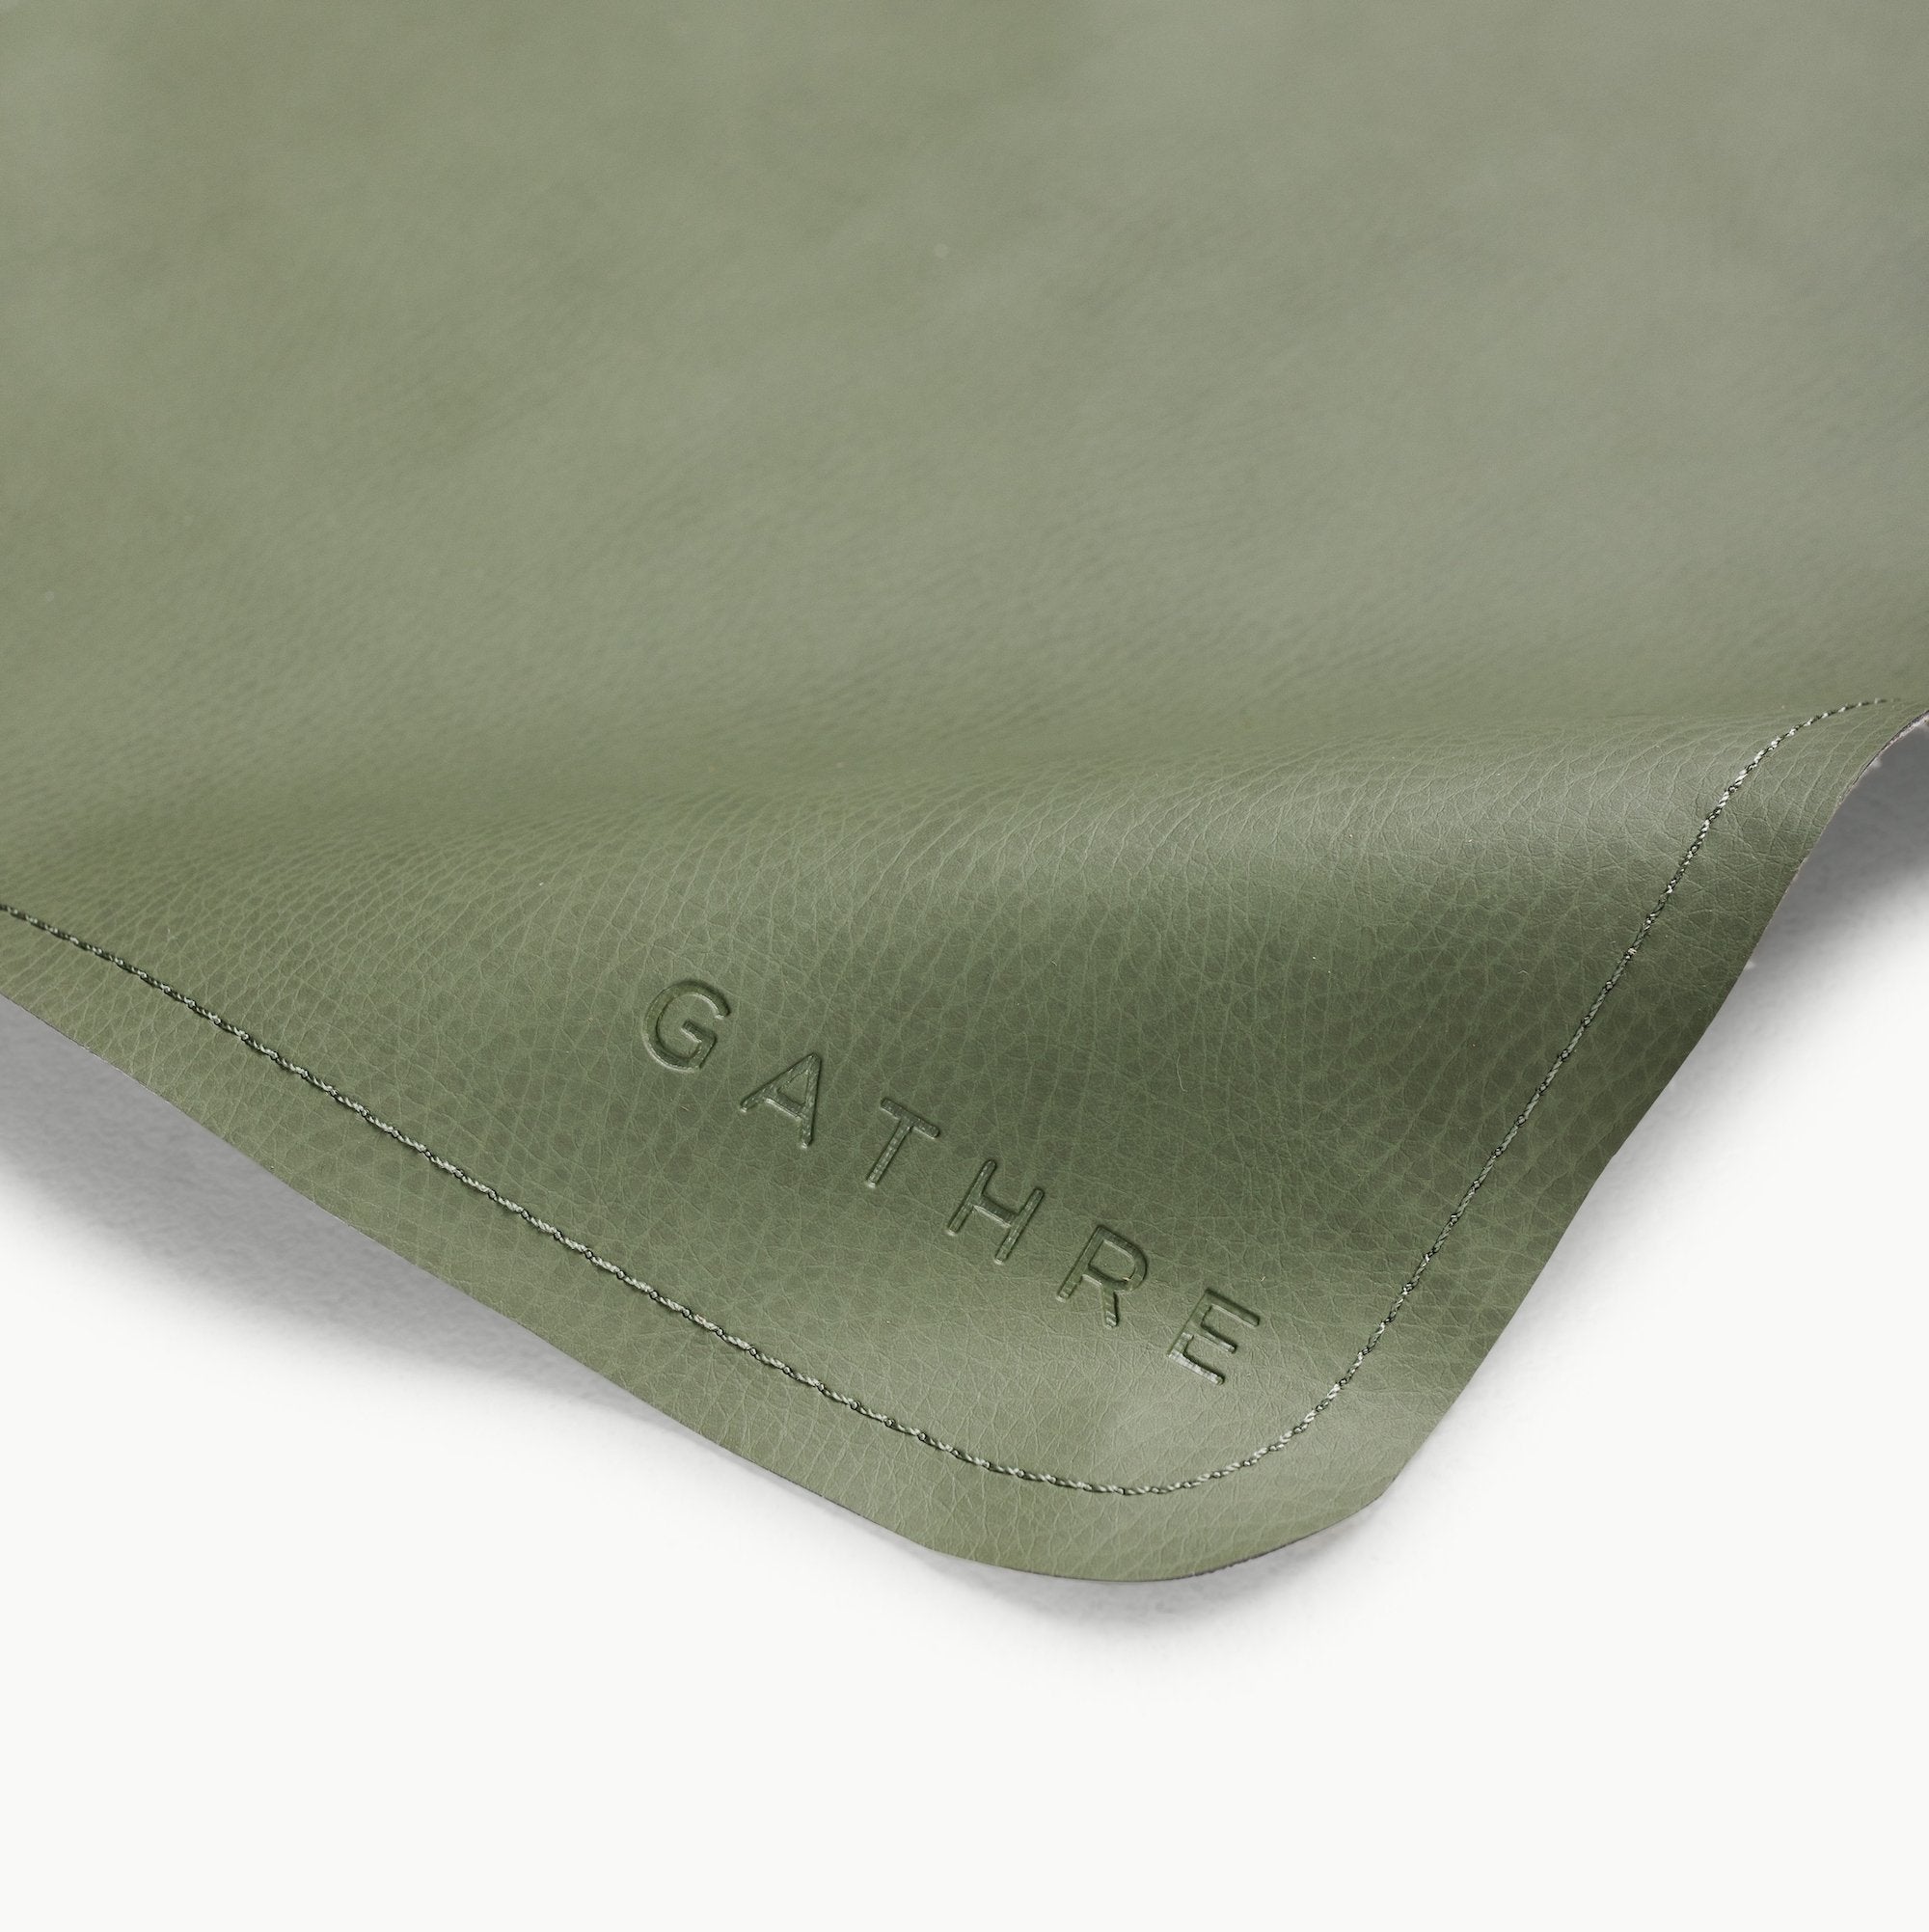 Thyme / Square@Gathre deboss on the Thyme Maxi Square Mat